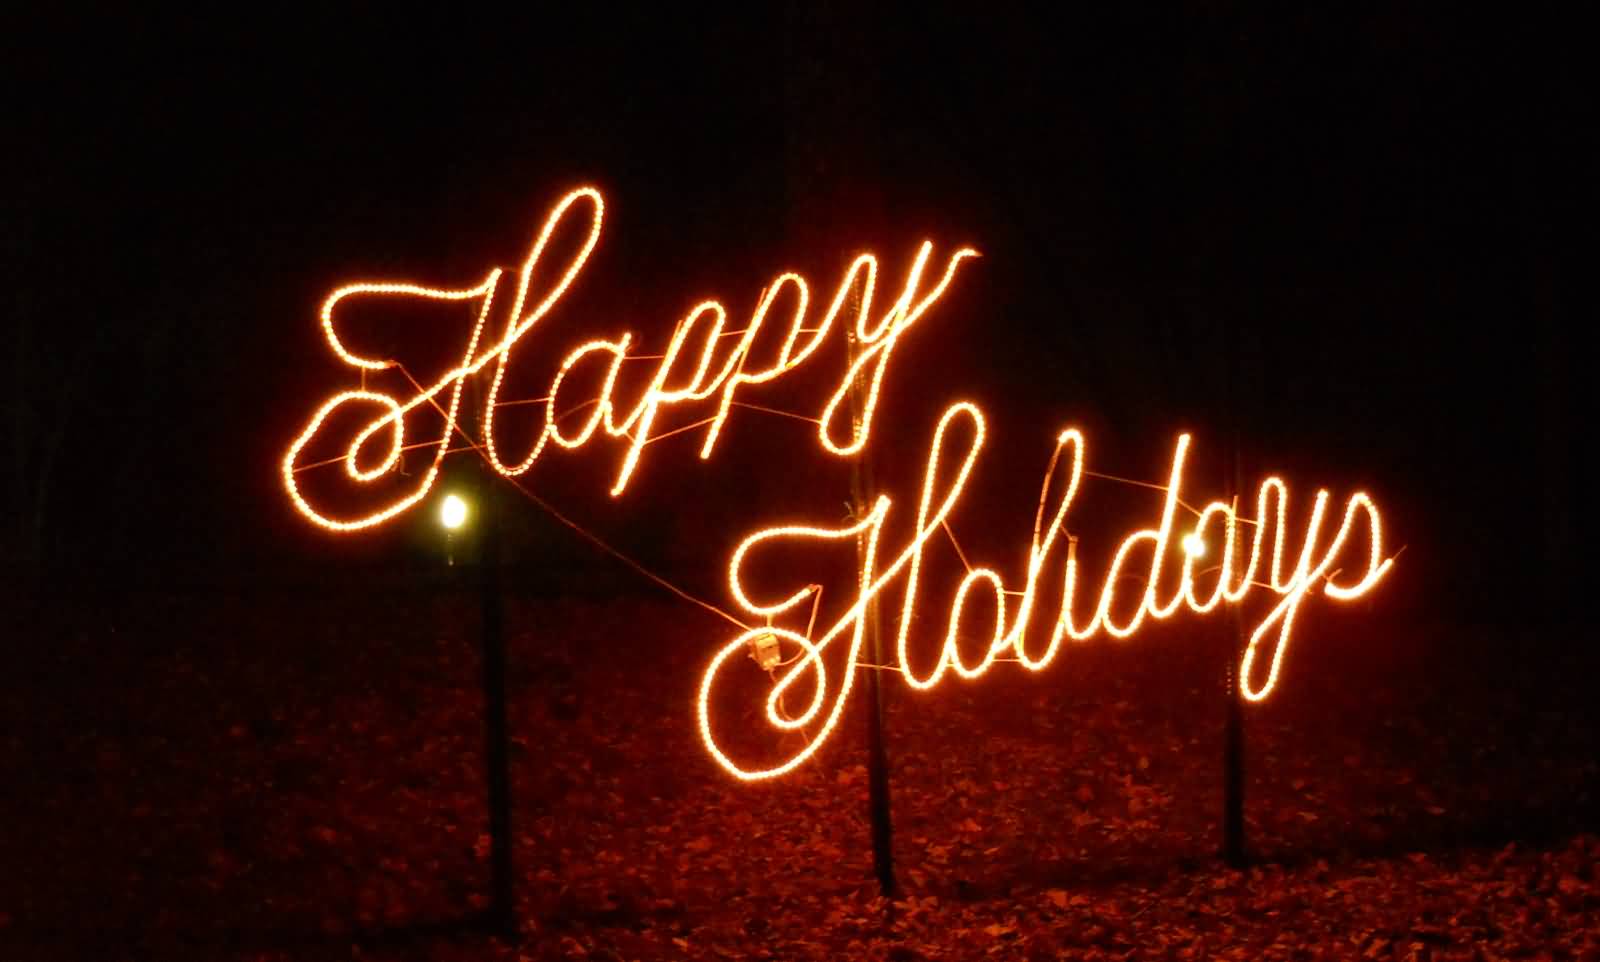 Happy Holidays Glowing Signboard